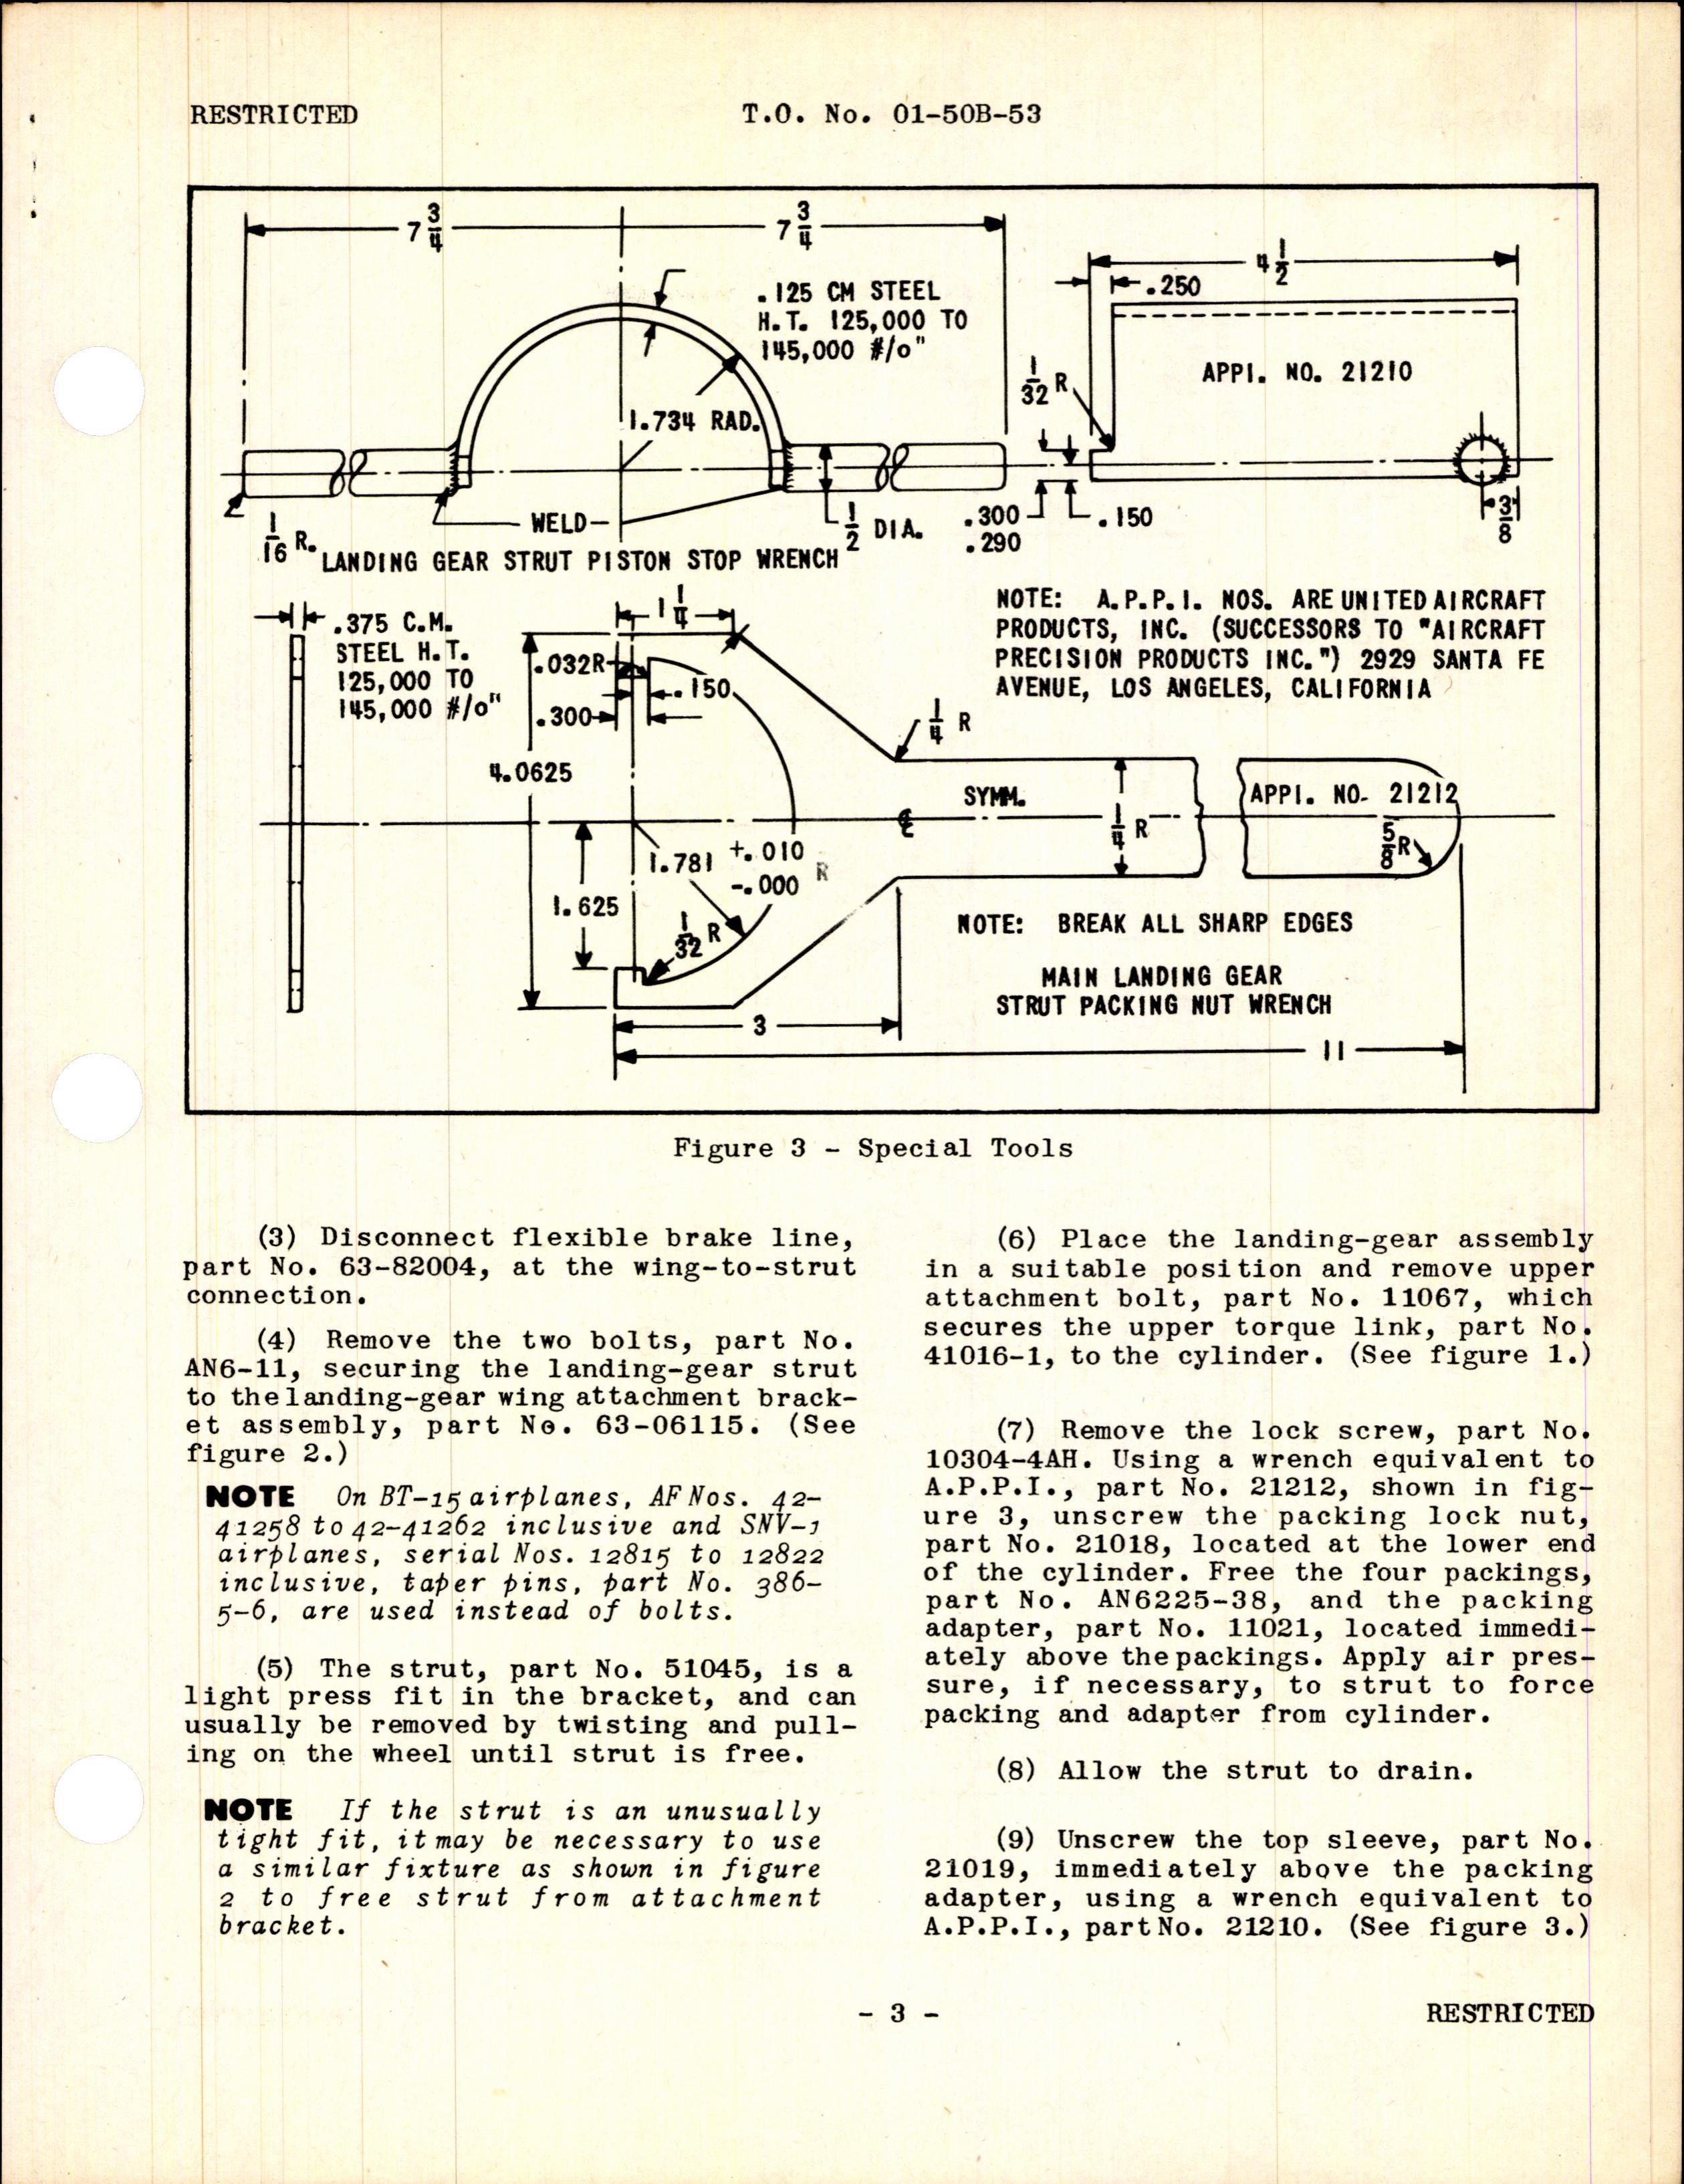 Sample page 3 from AirCorps Library document: Inspection, Repair, and Reinforcement of Landing-Gear Shock Strut Torque Lugs for BT-13